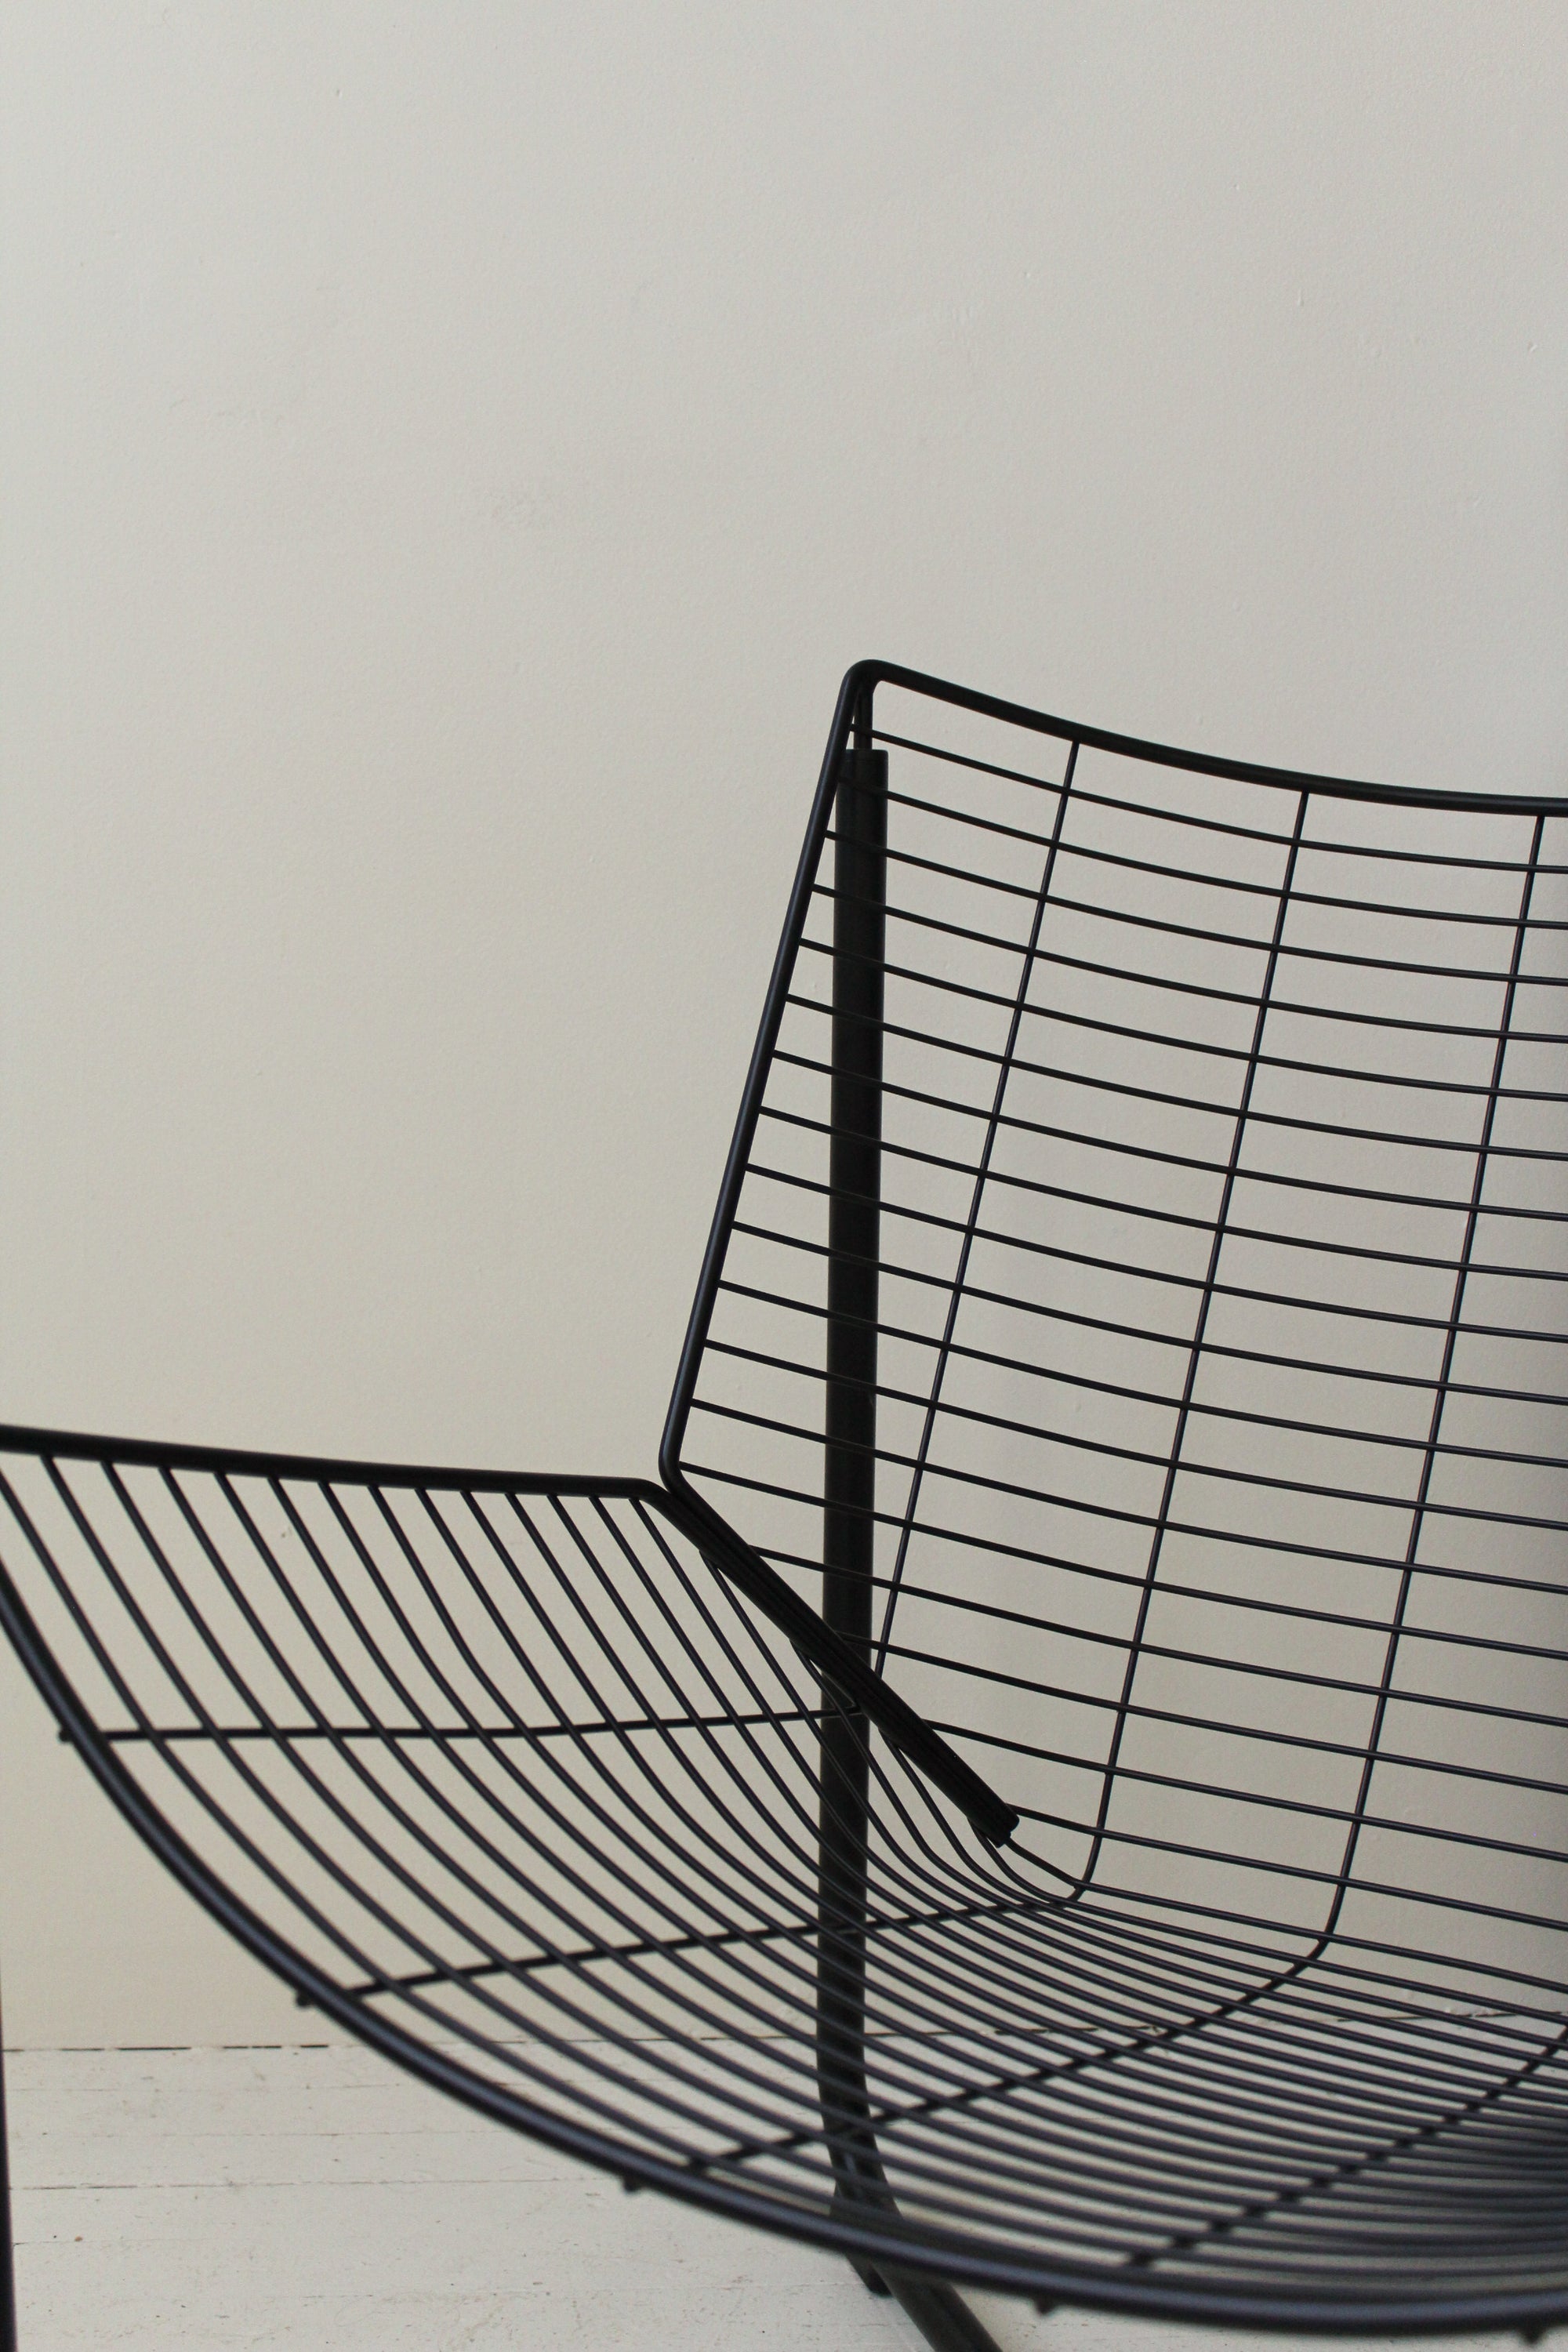 "Jarpen" Wire Chair by Niels Gammelgaard for Ikea